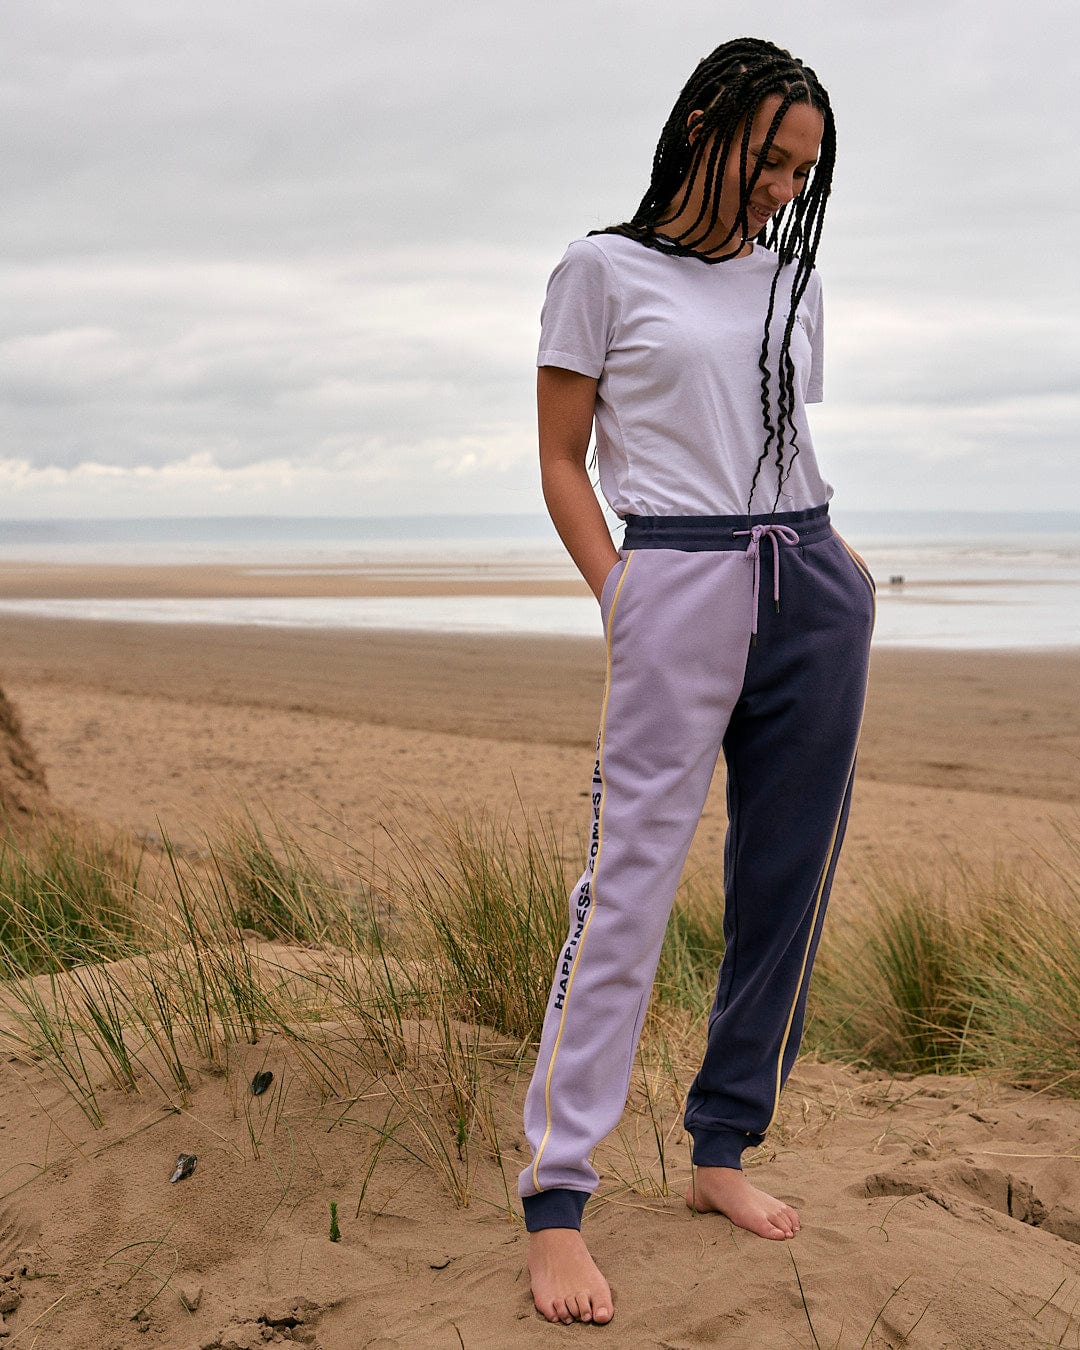 A woman in a Betty - Womens Jogger - Light Purple t-shirt standing on a sand dune by Saltrock.